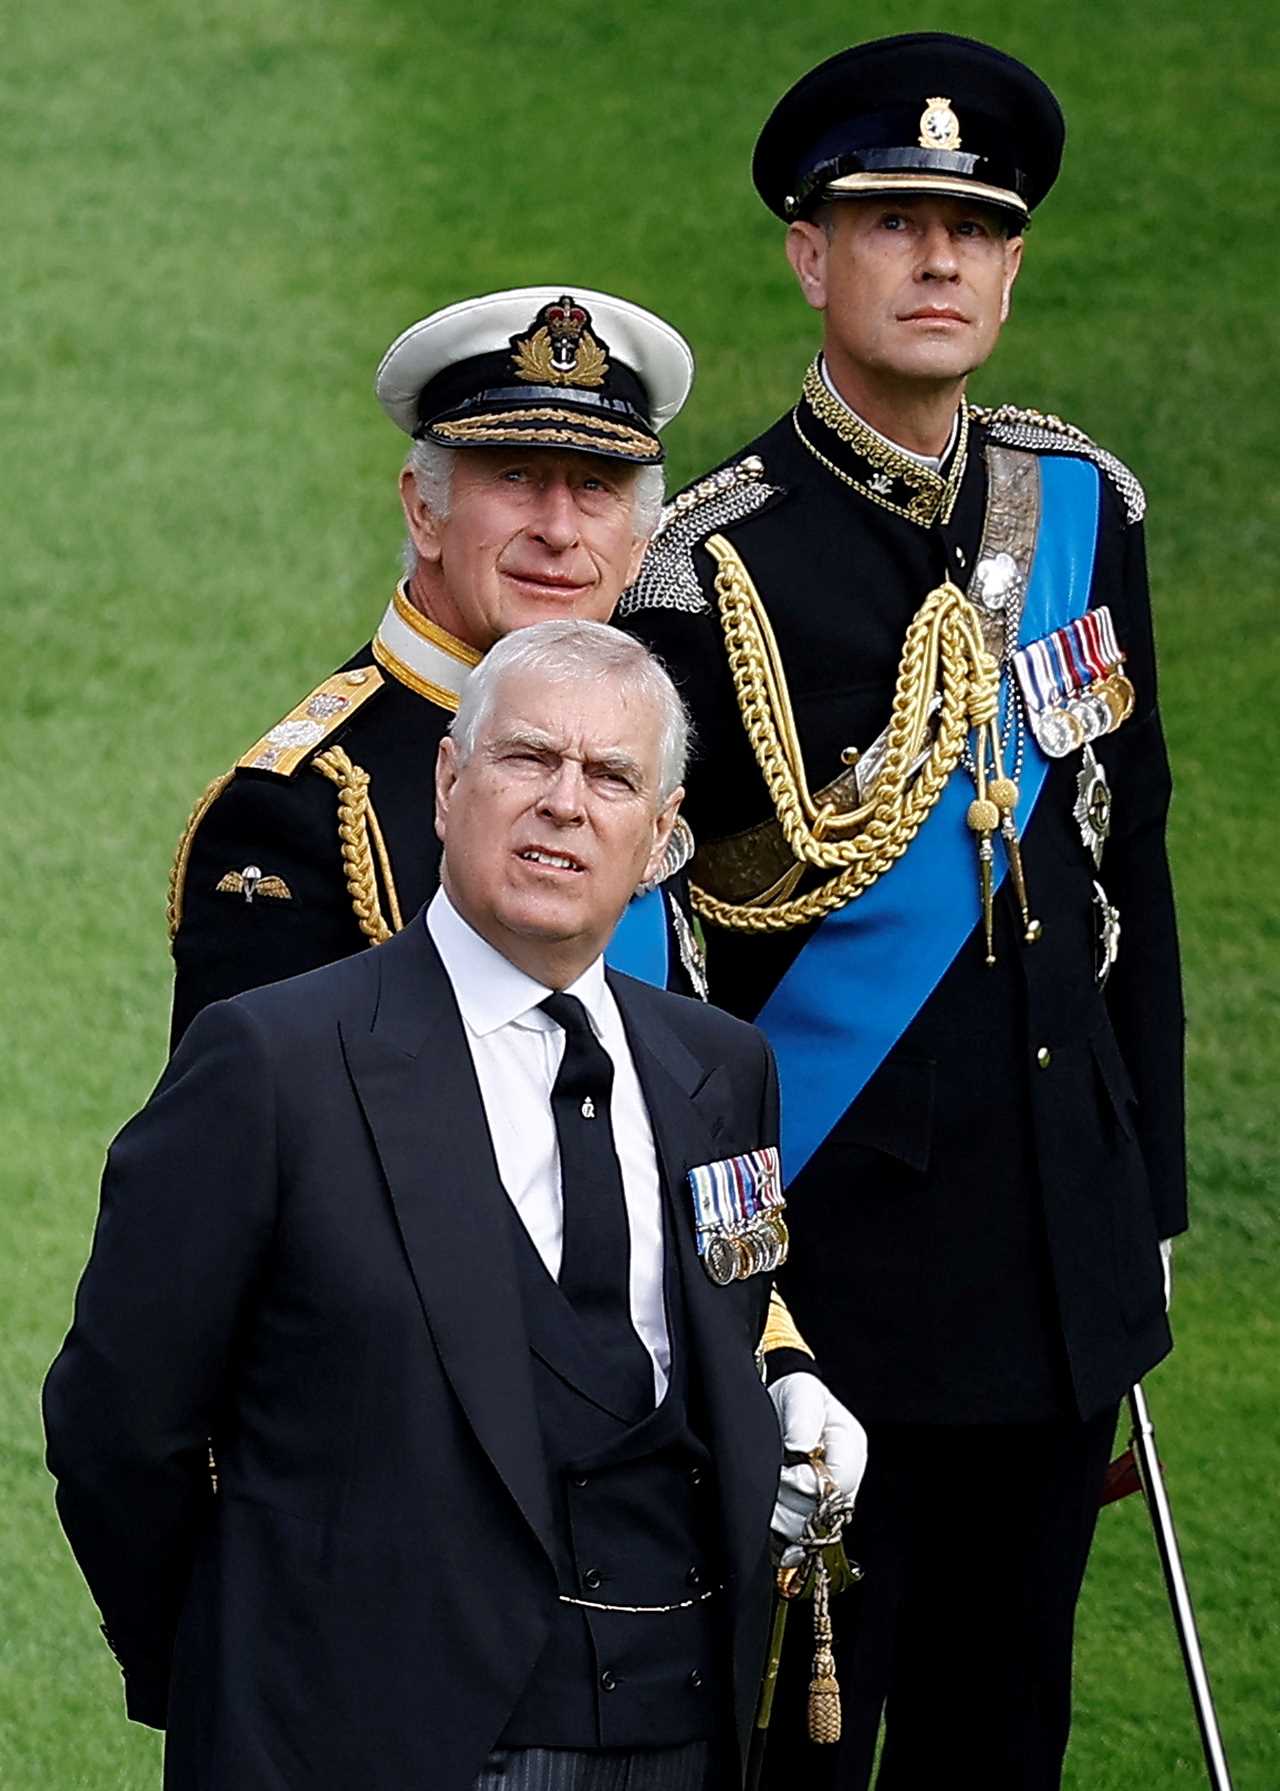 Disgraced Prince Andrew ‘to dress-up as royal for a day’ as he’s invited to party alongside King Charles